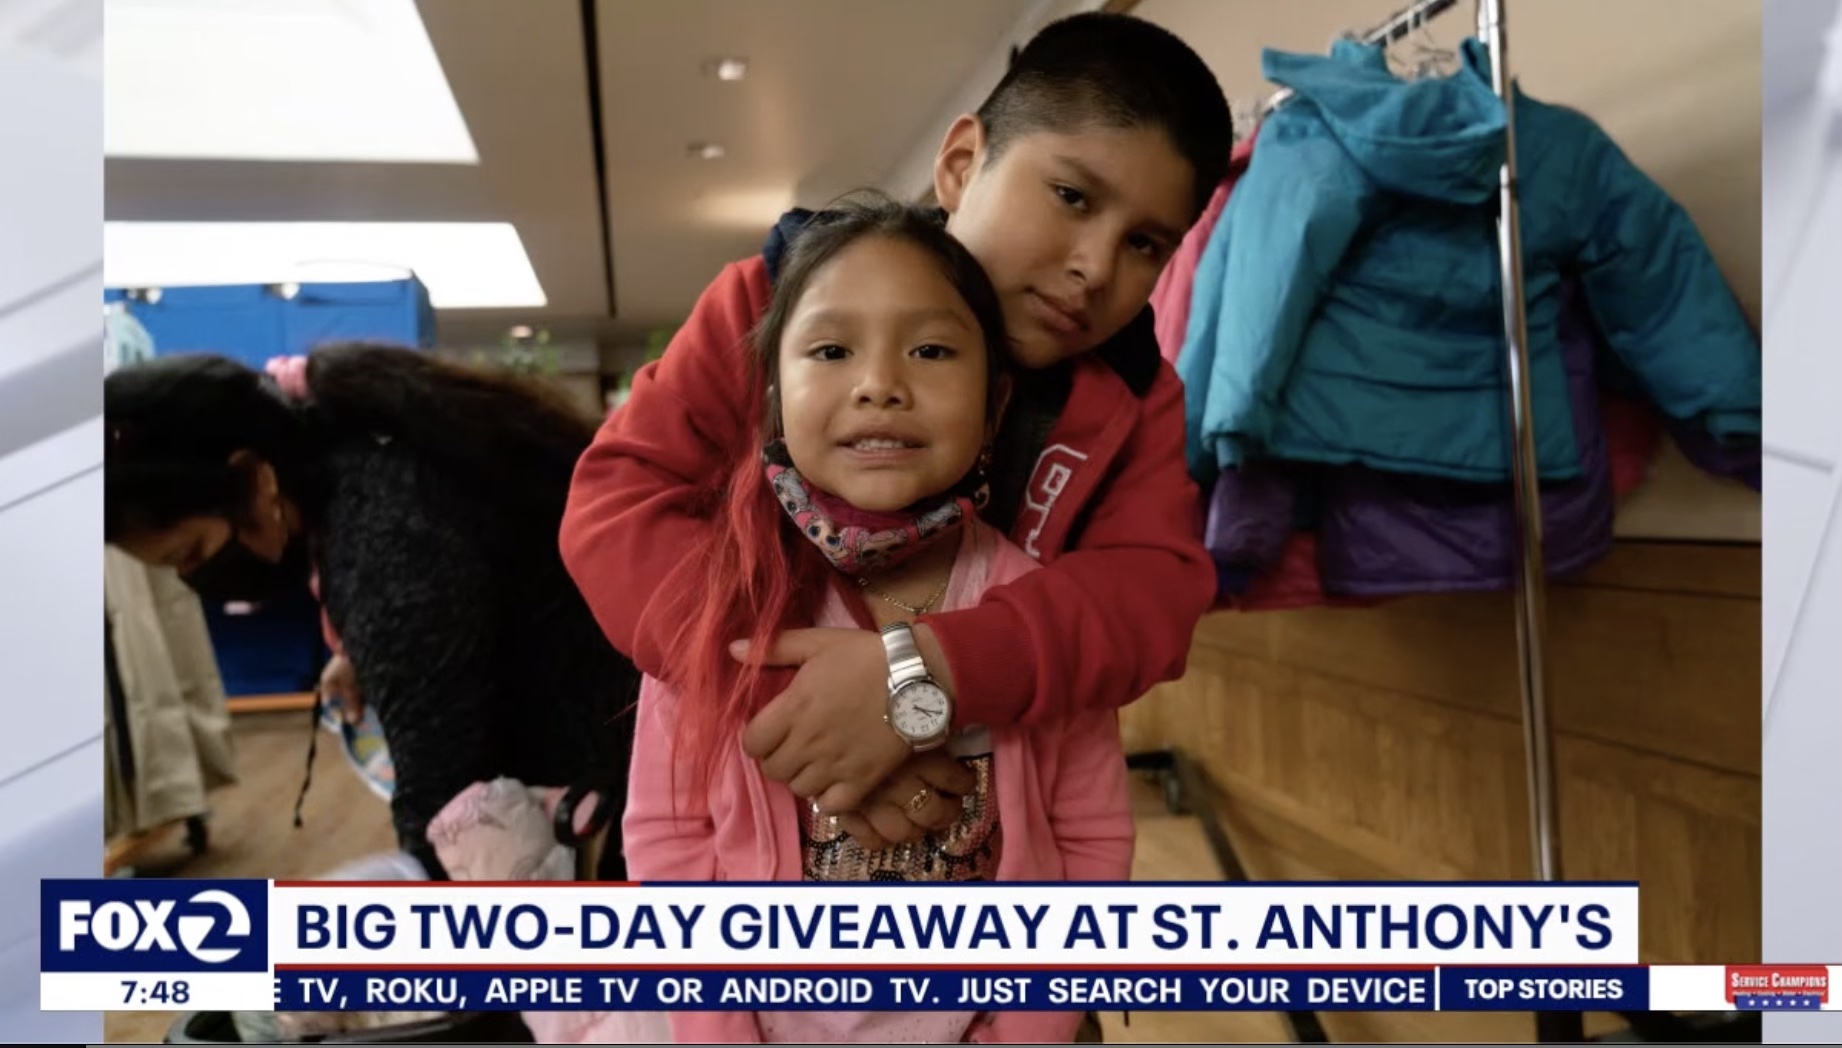 KTVU Fox 2 News: Big Two-Day Back to School Giveaway at St. Anthony’s